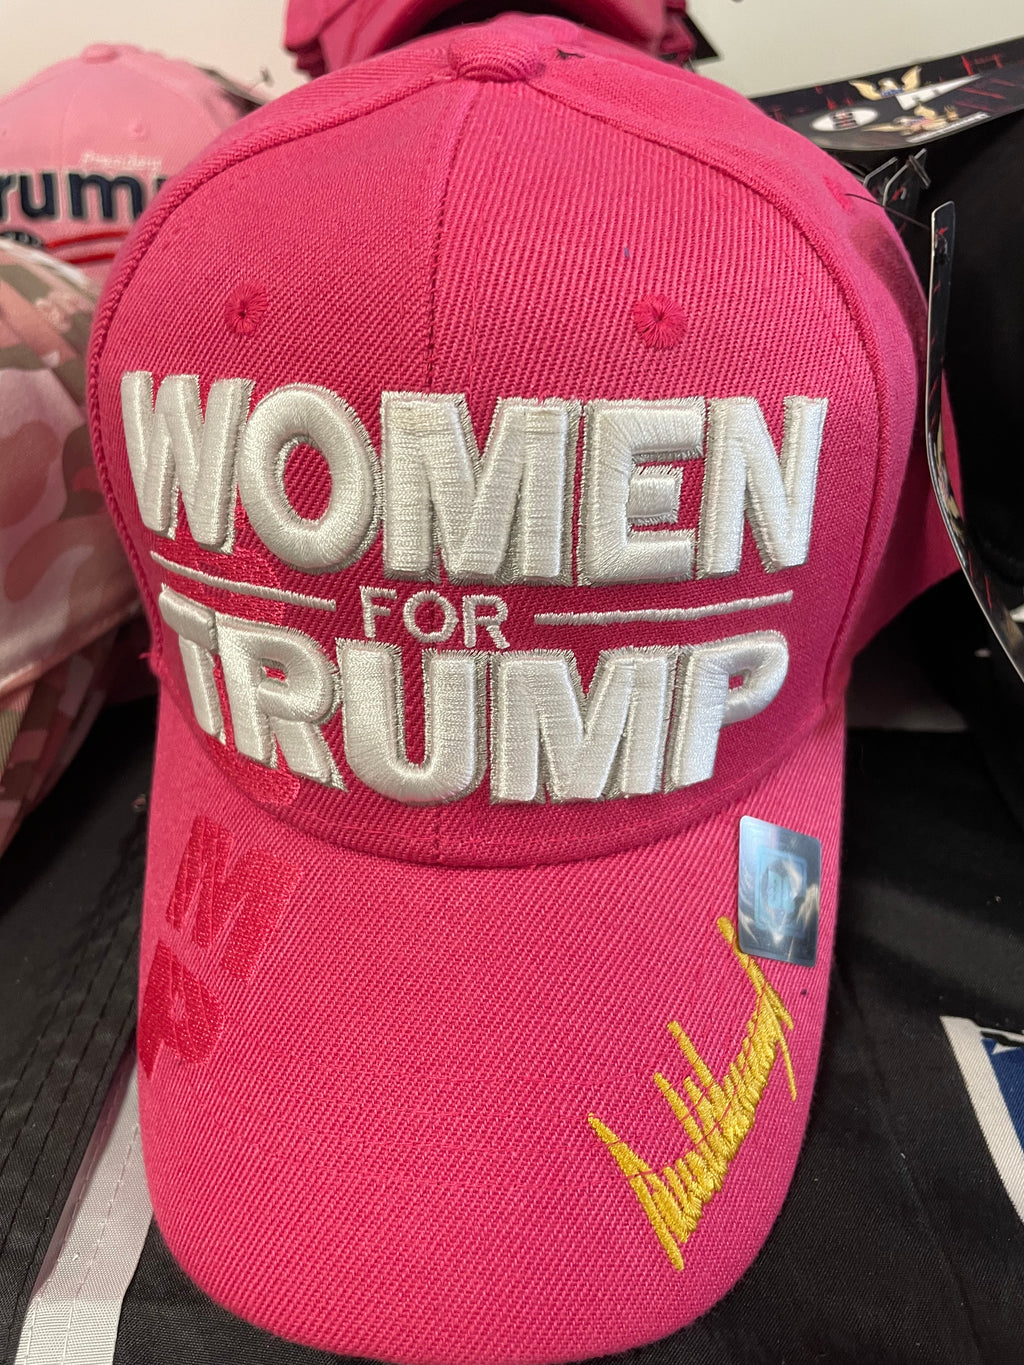 "Women for Trump" Pink Embroidered Hat